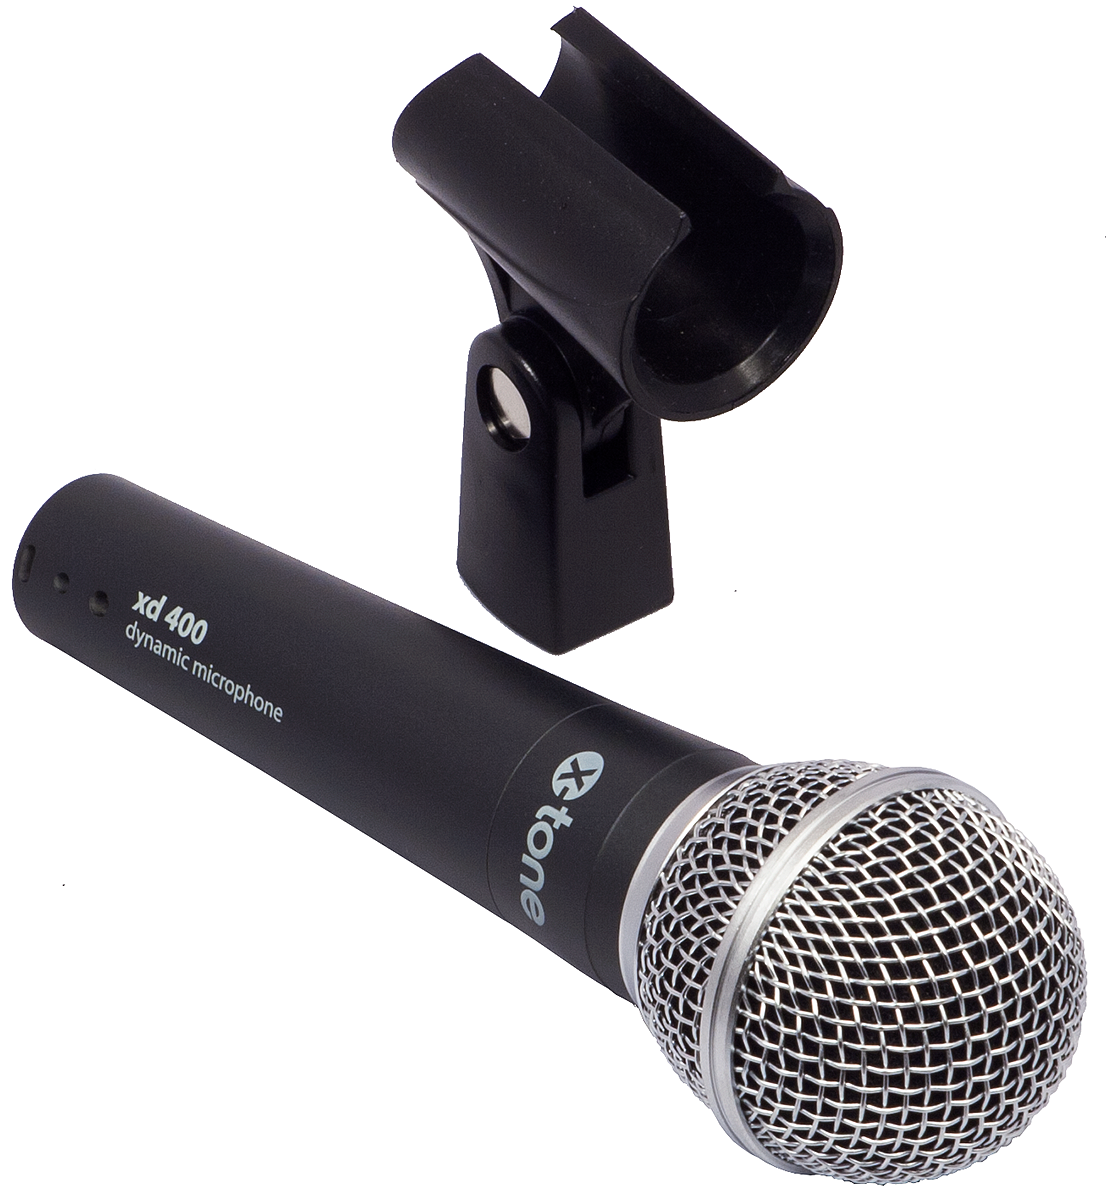 X-tone Xd-400 - Vocal microphones - Main picture